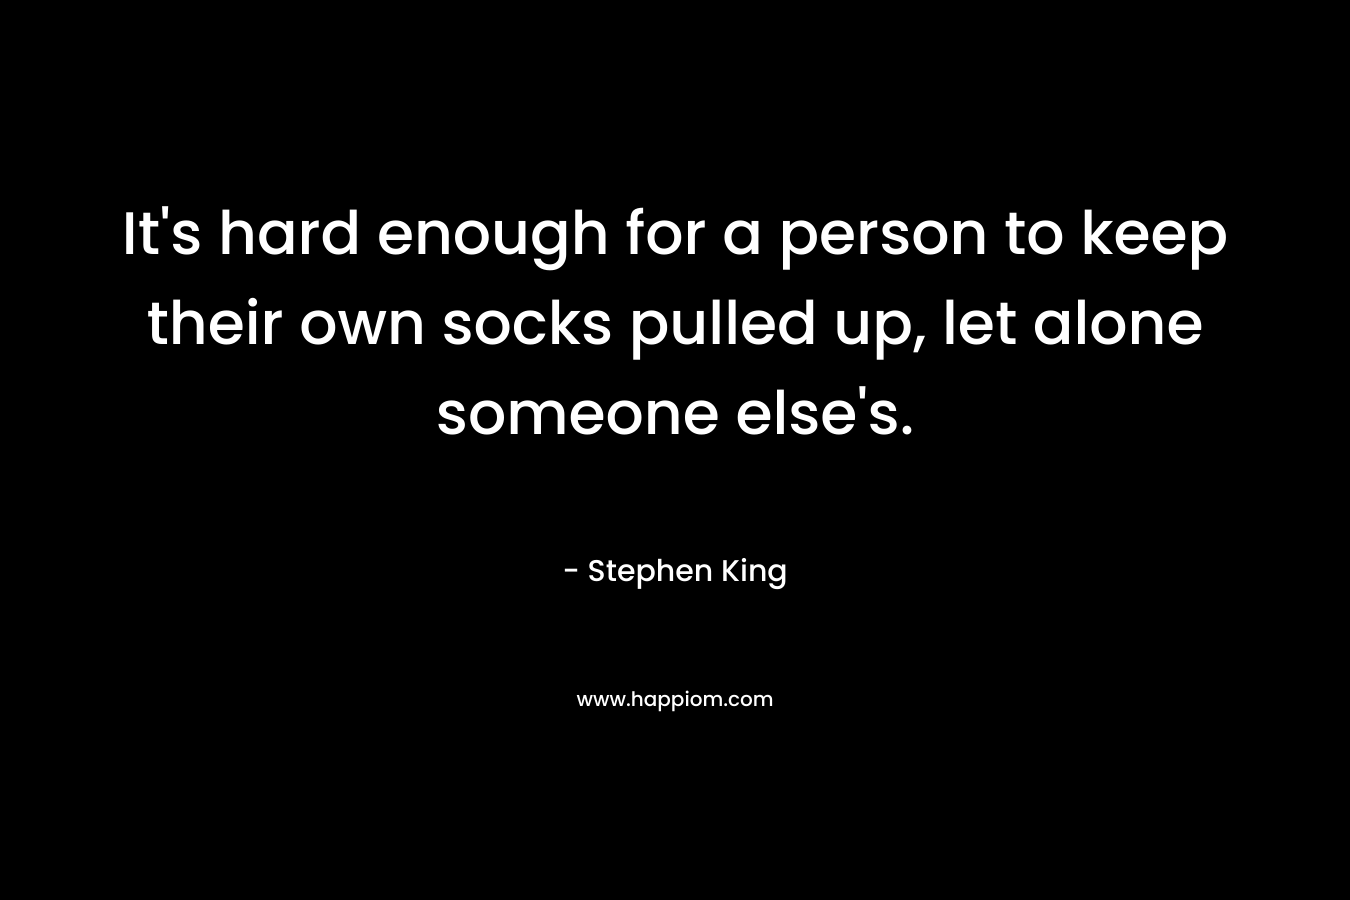 It's hard enough for a person to keep their own socks pulled up, let alone someone else's.